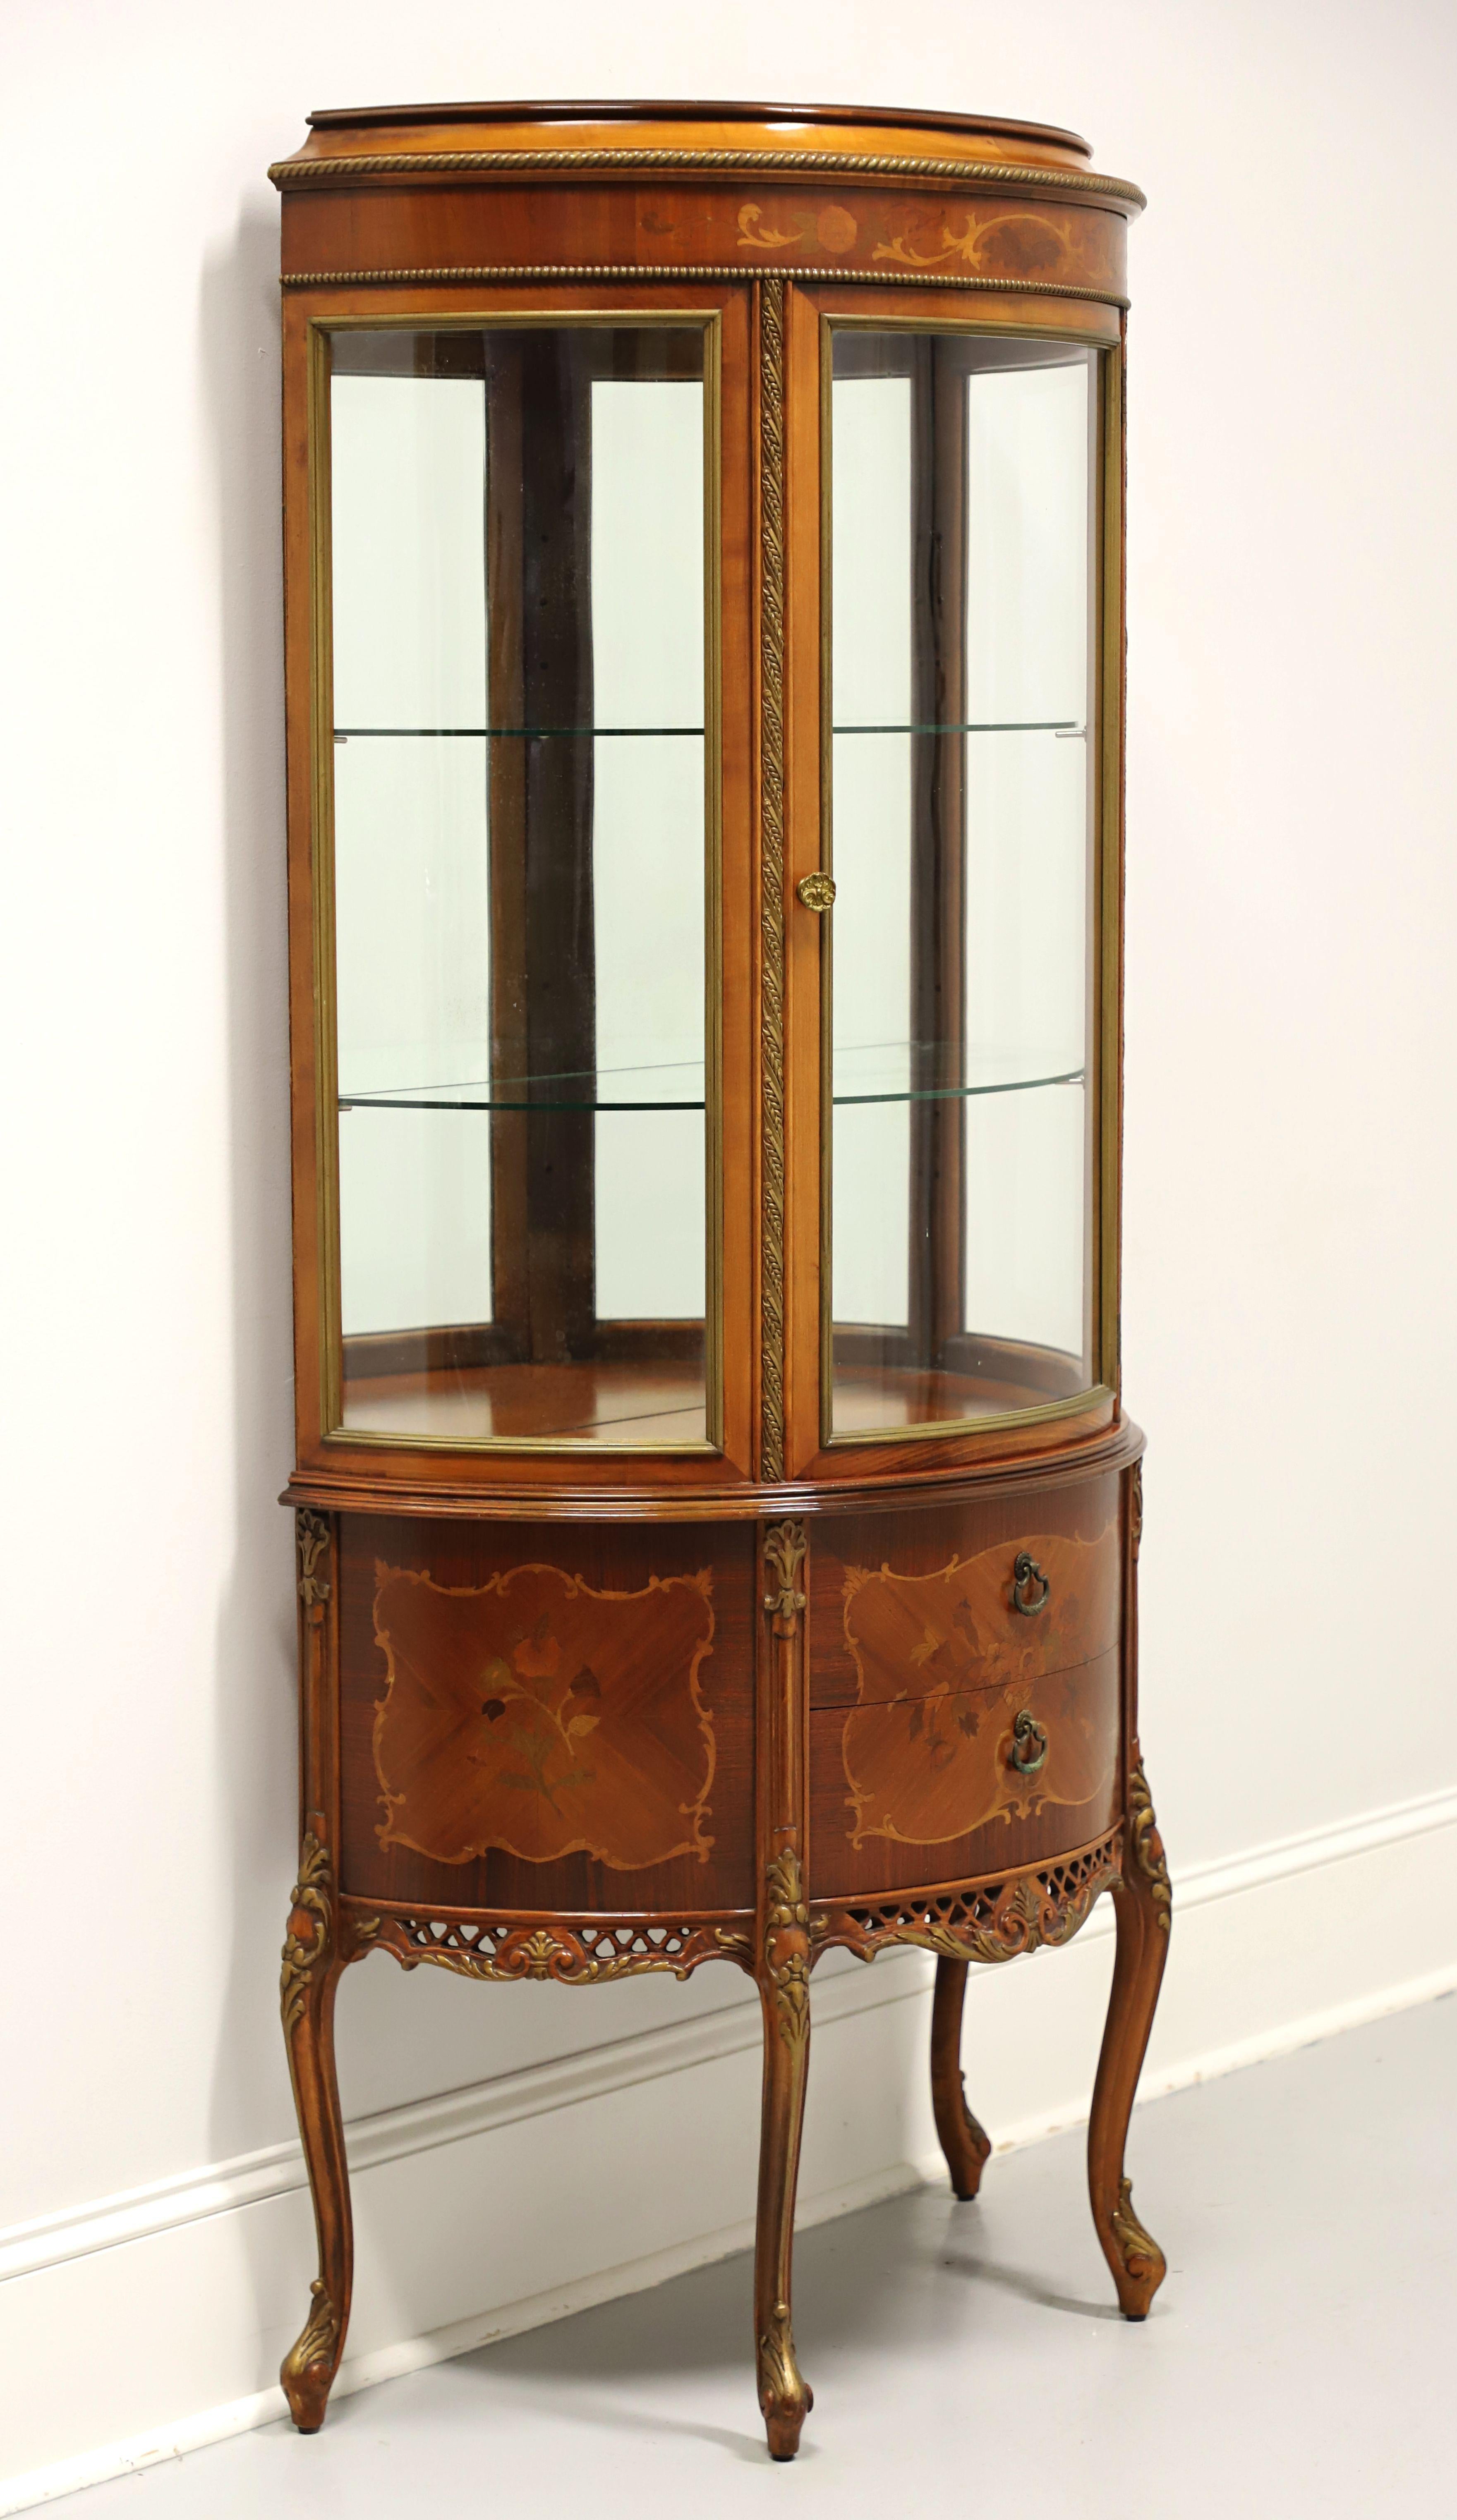 A French Louis XV style display vitrine, unbranded. Mahogany & satinwood with floral marquetry designs, half-circle in shape, brass hardware, decorative gold painted accents, open carved apron, and elevated on gold accented curved legs with pad